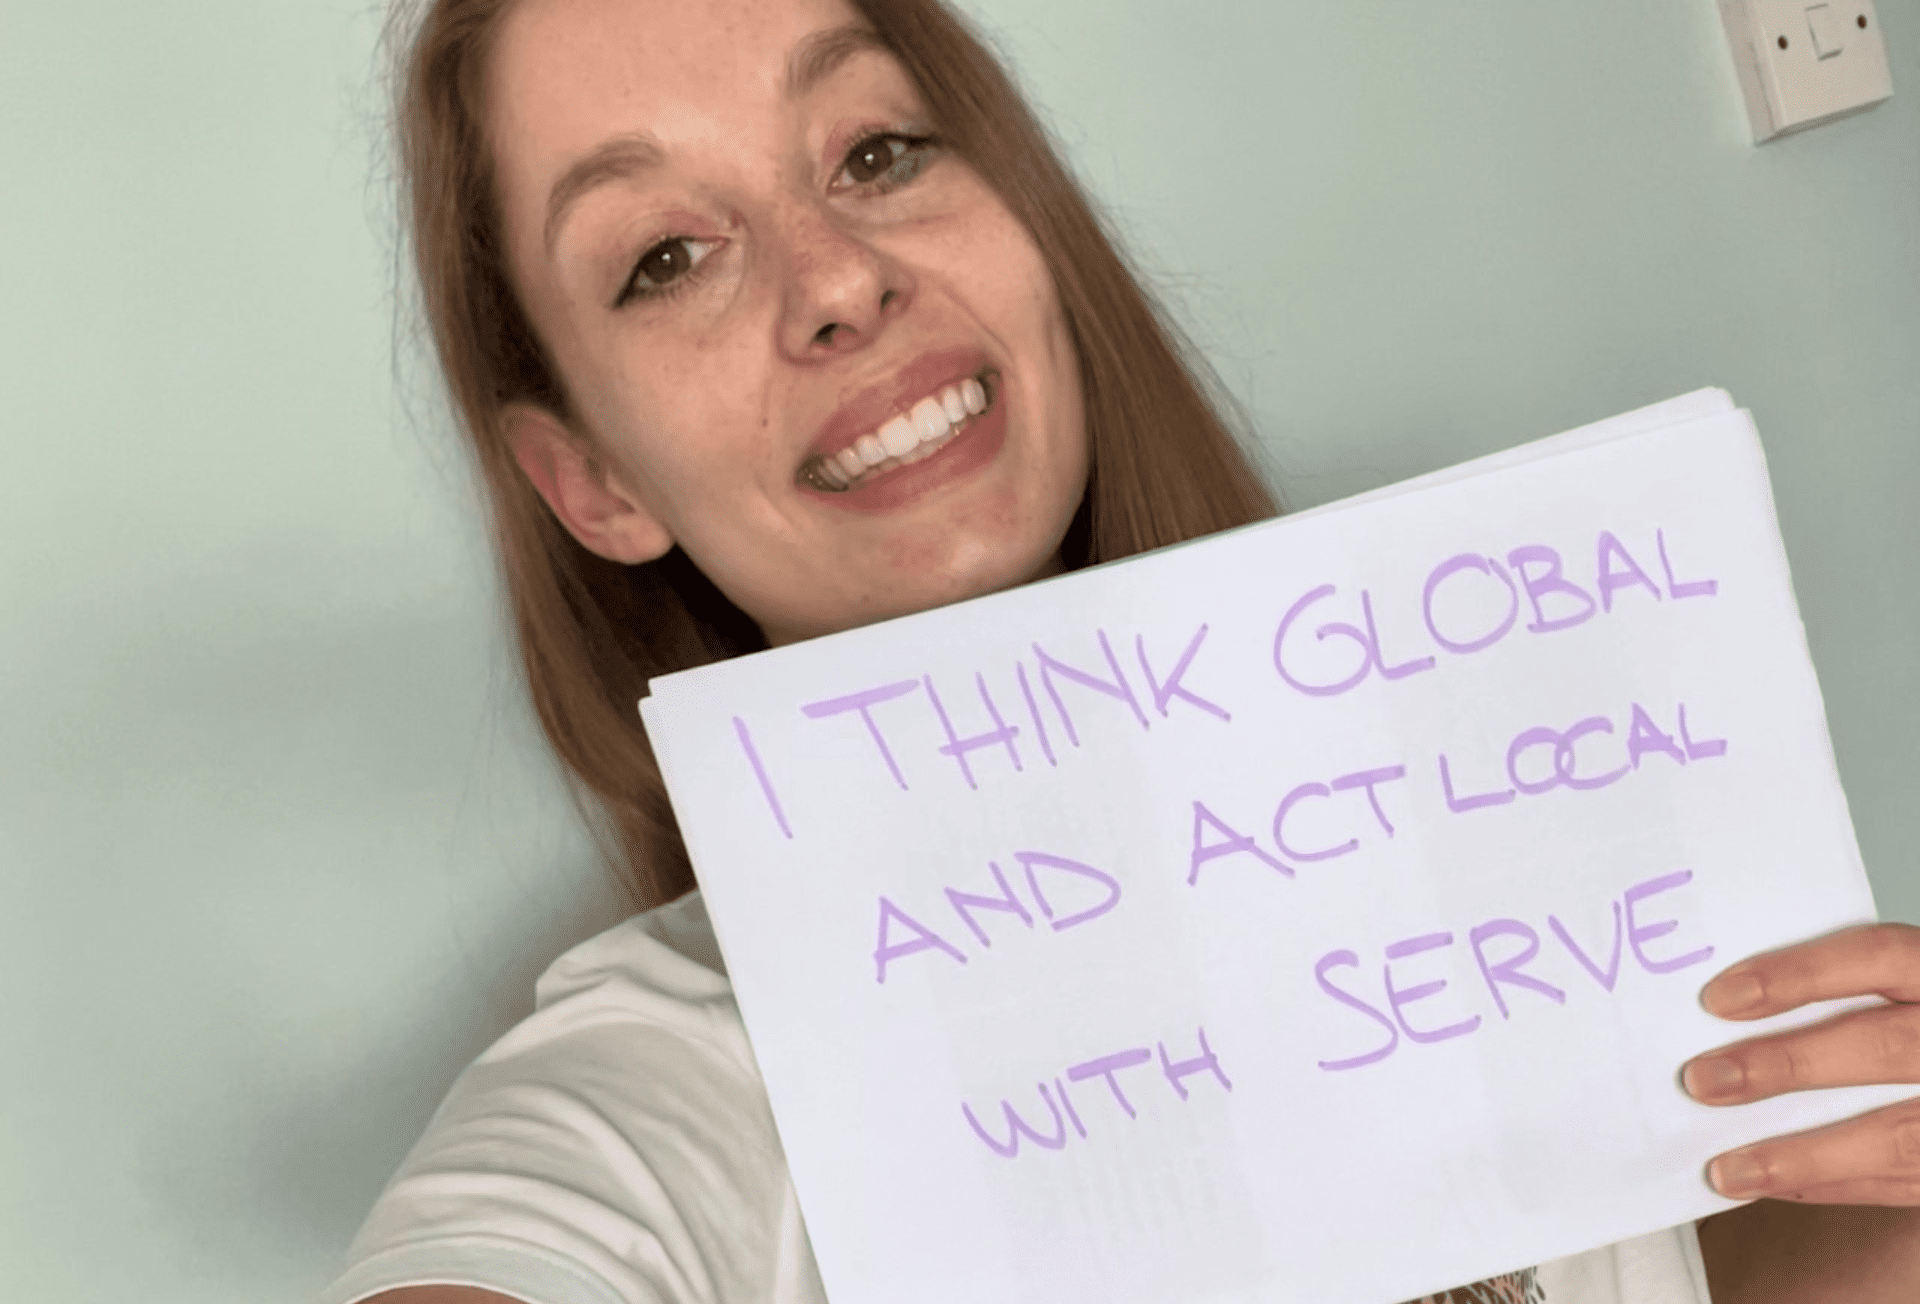 SERVE Think Global Act Local